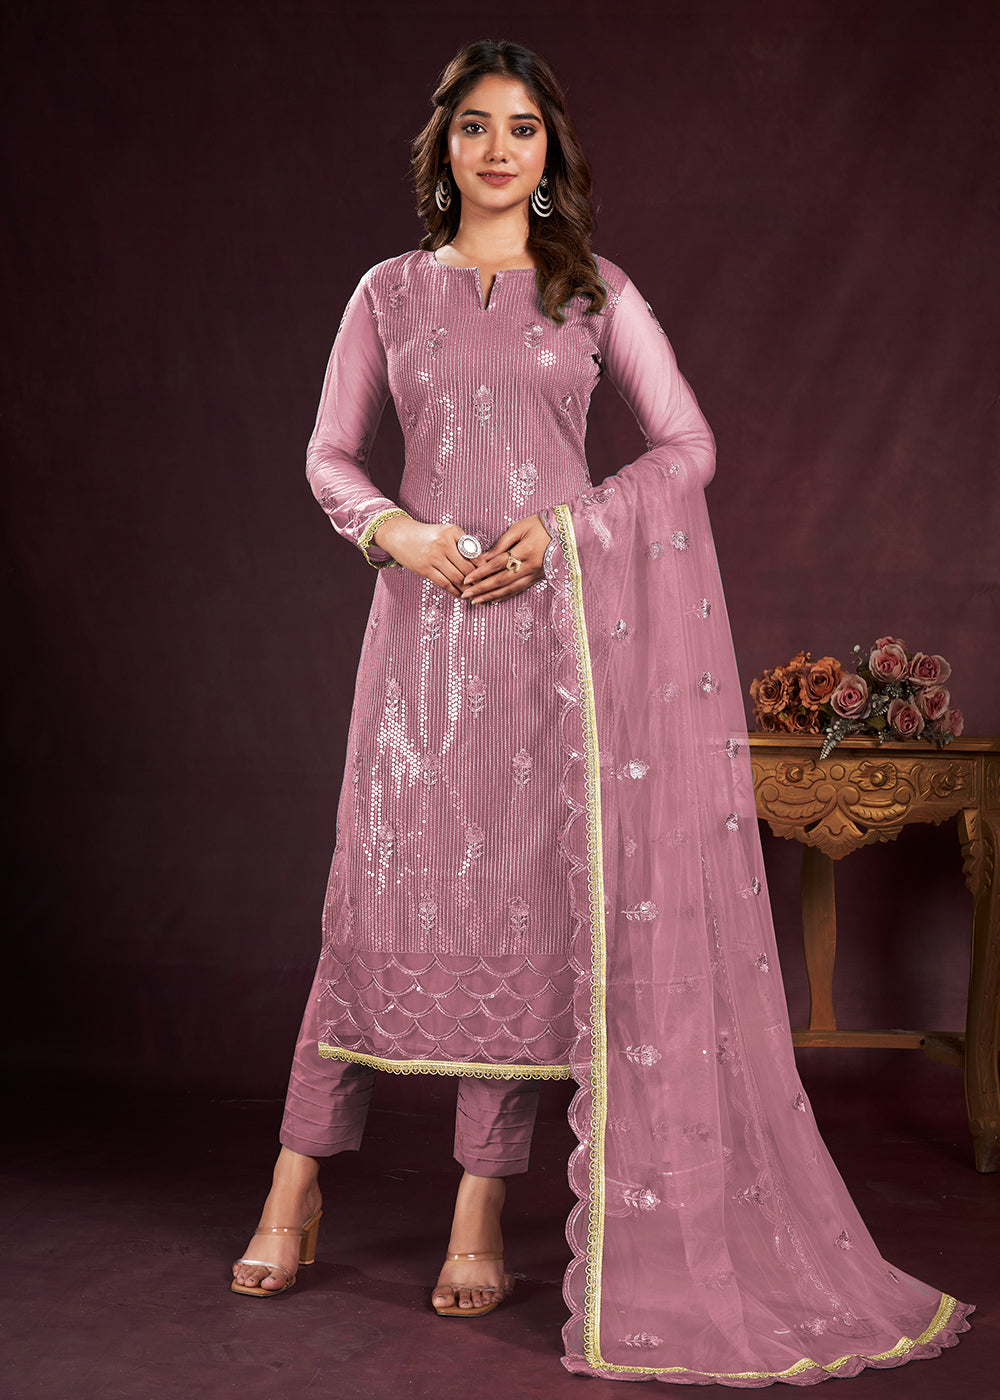 Buy Now Rose Pink Butterfly Net Embroidered Festive Salwar Suit Online in USA, UK, Canada, Germany, Australia & Worldwide at Empress Clothing. 